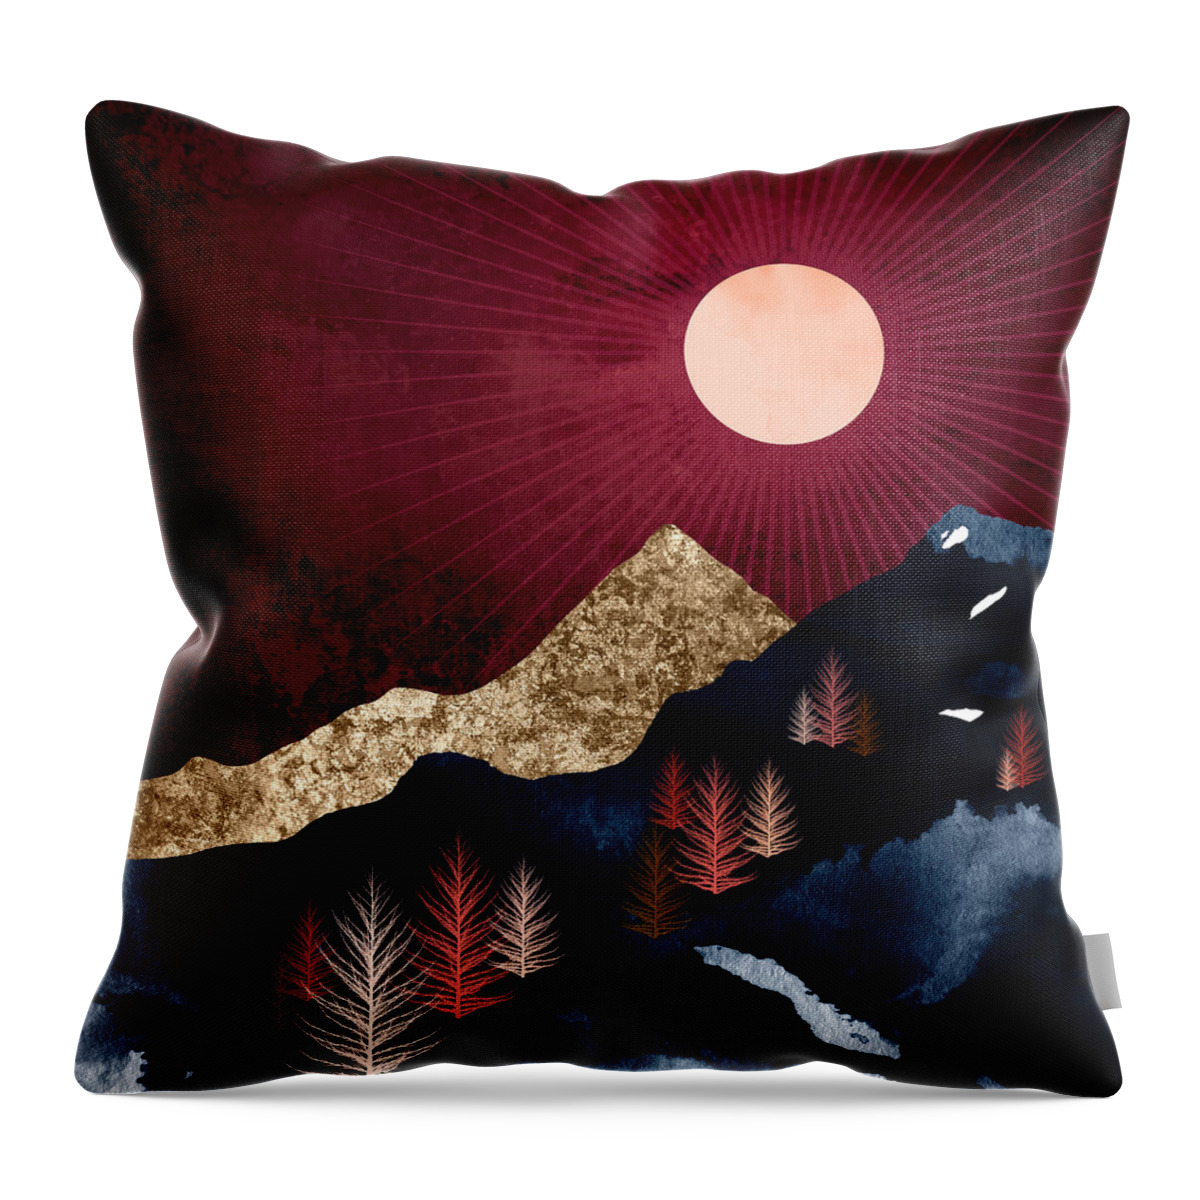 Digital Throw Pillow featuring the digital art Autumn Night by Spacefrog Designs